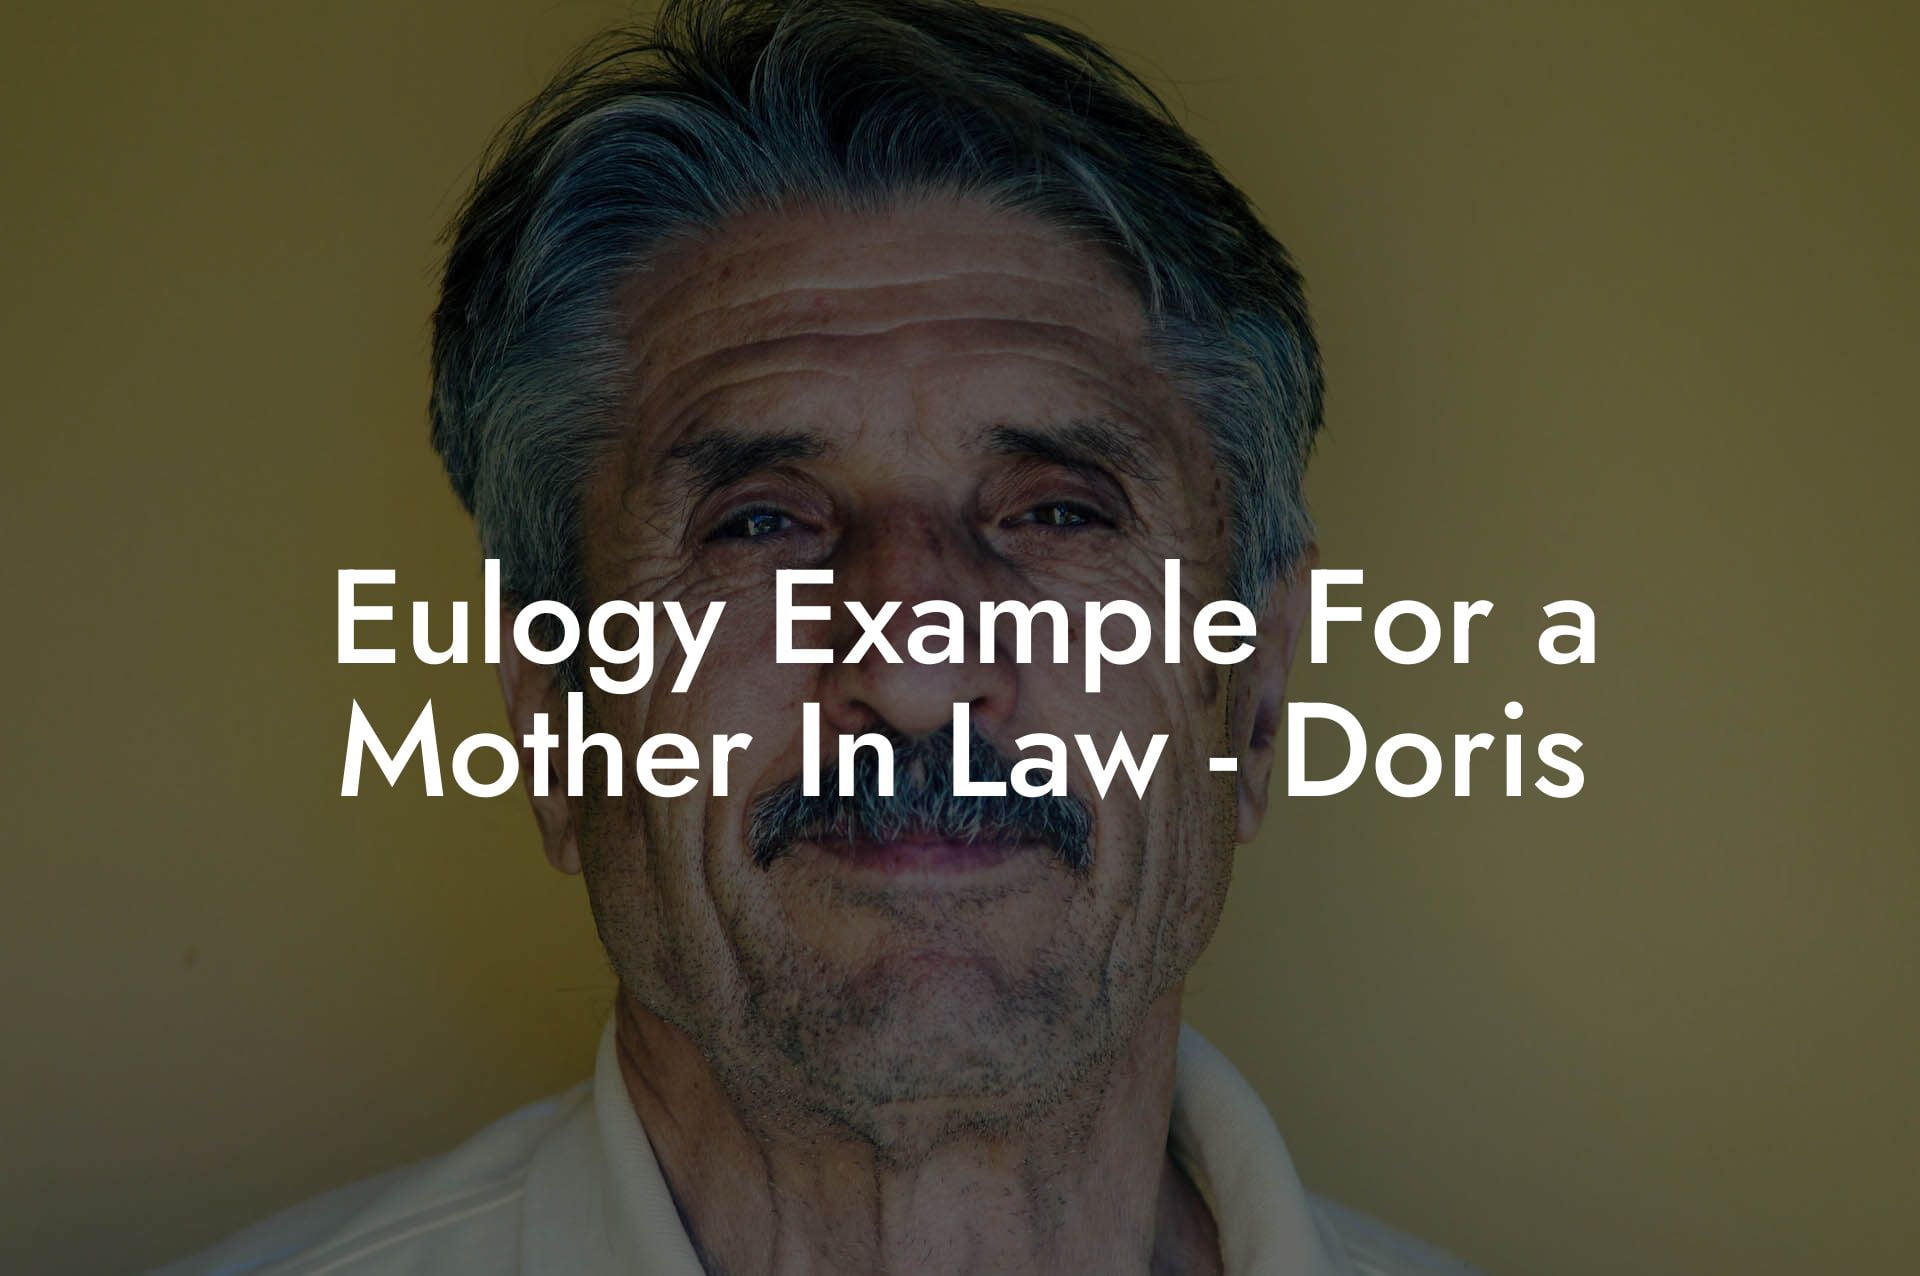 Eulogy Example For a Mother In Law   Doris